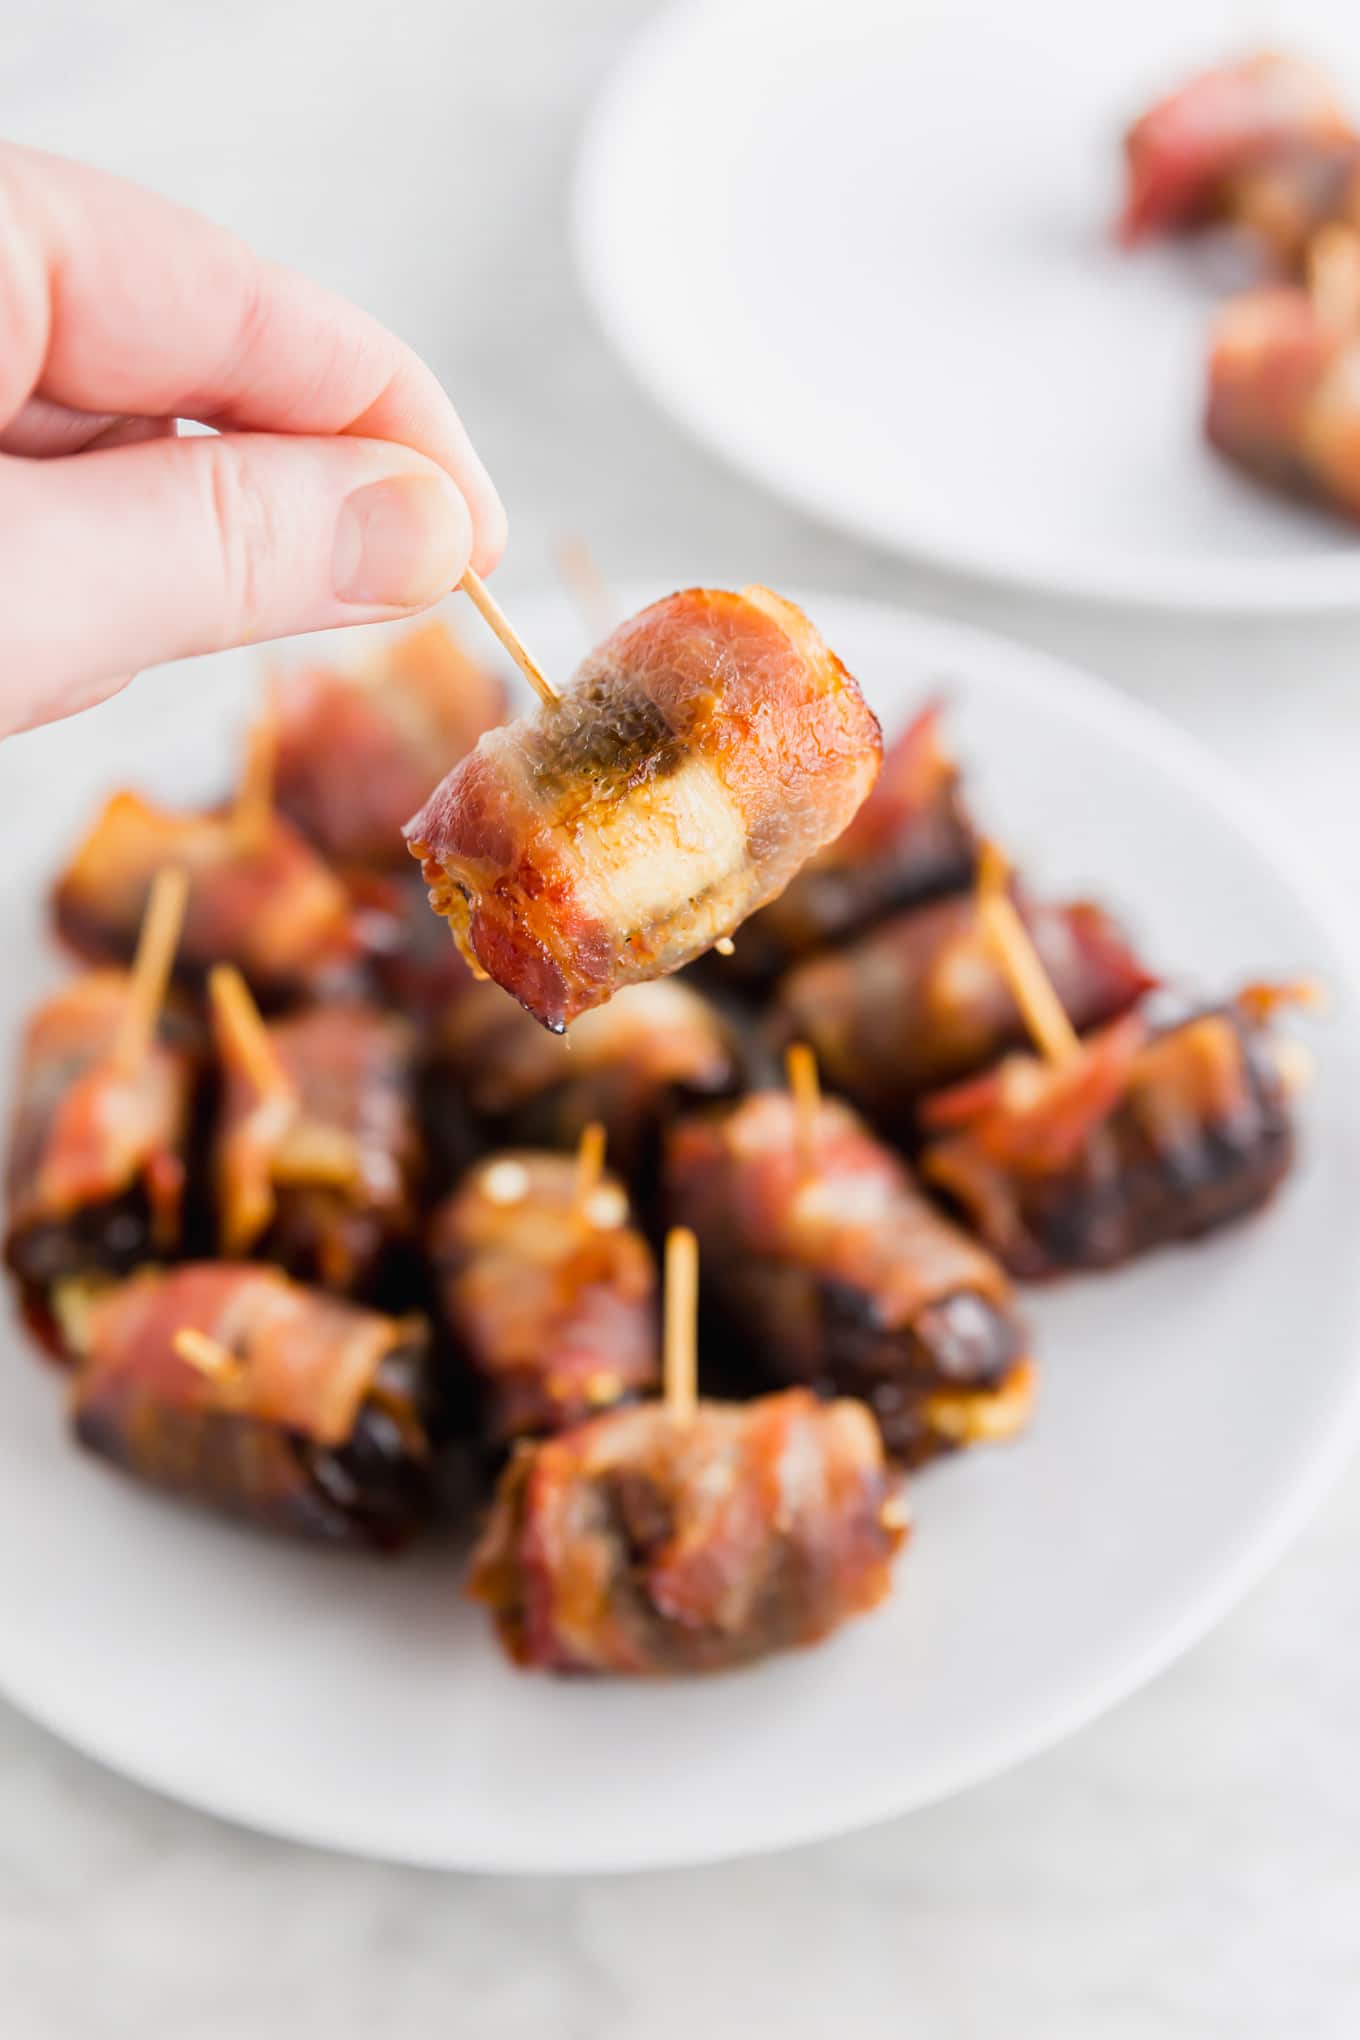 A photo of a hand holding a bacon wrapped date over a platter of goat cheese stuffed dates. 